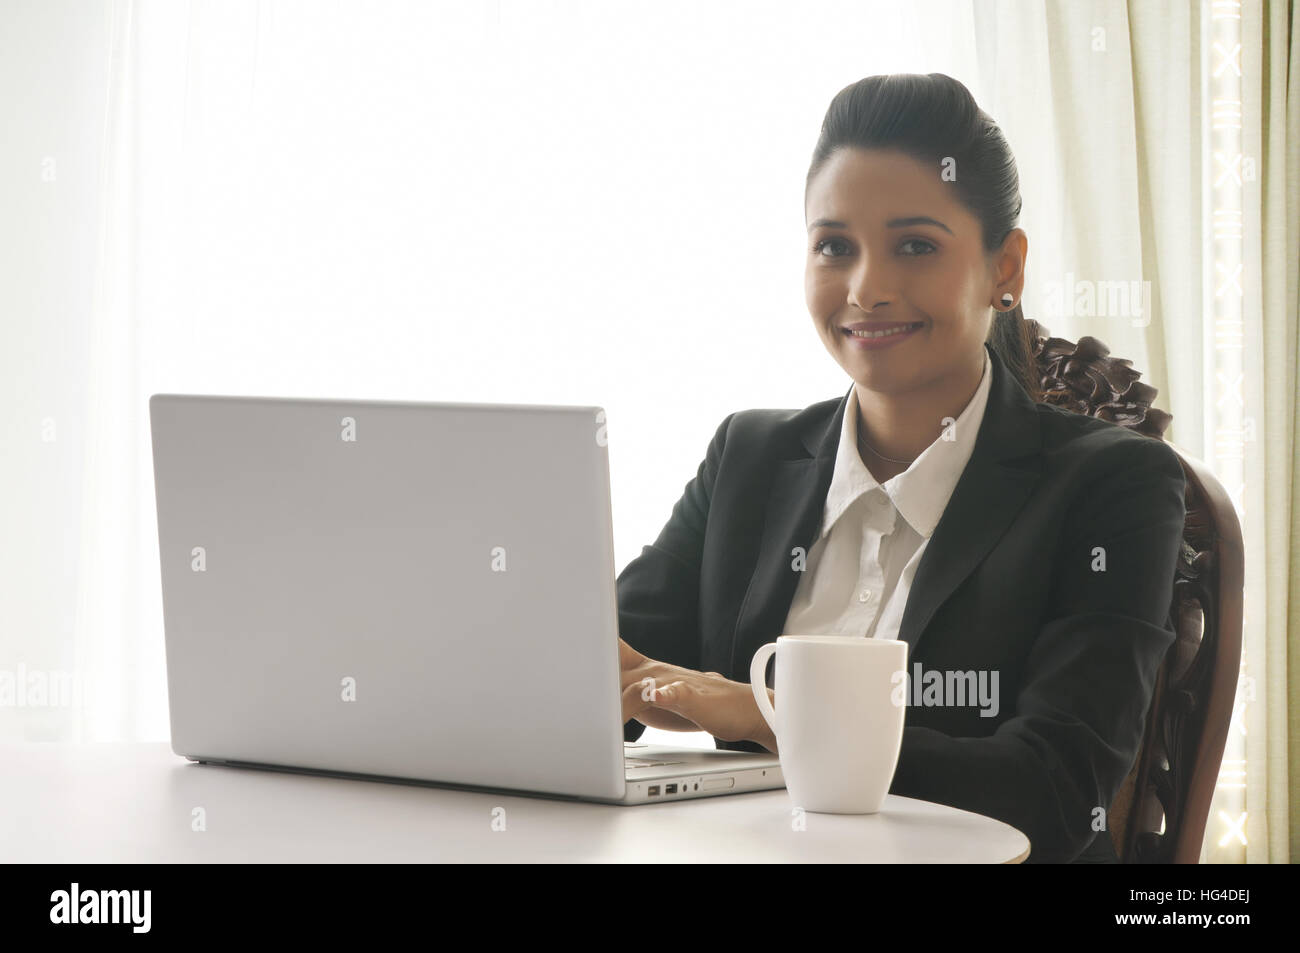 Business Woman wearing headphones and using laptop Banque D'Images